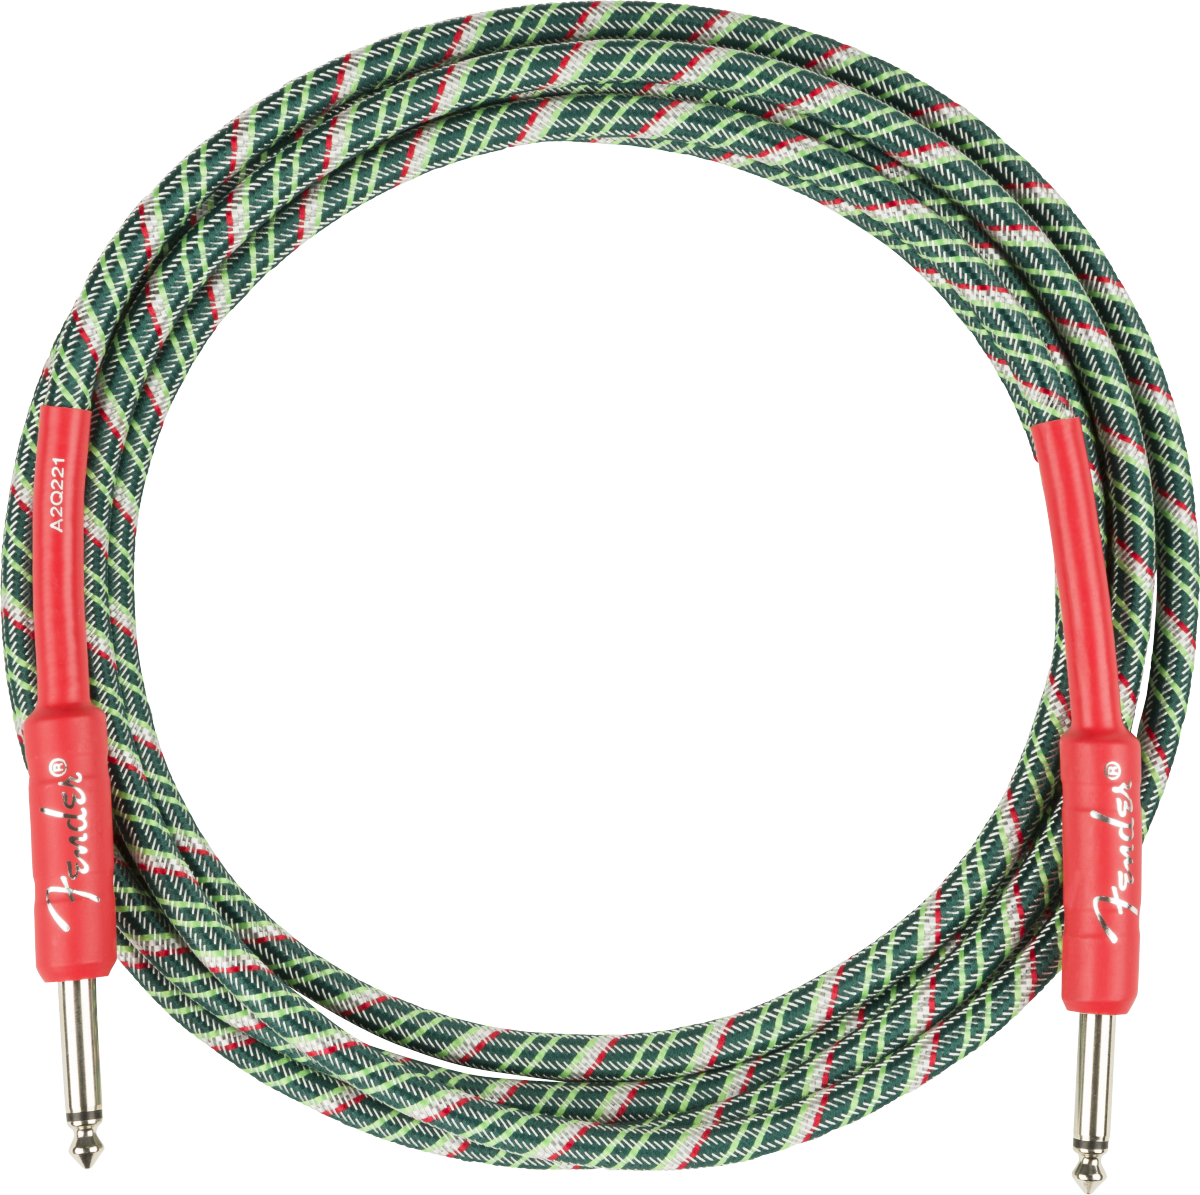 Fender Wreath Holiday Instrument Cable Droit Droit 10ft Red/green - Cable - Main picture